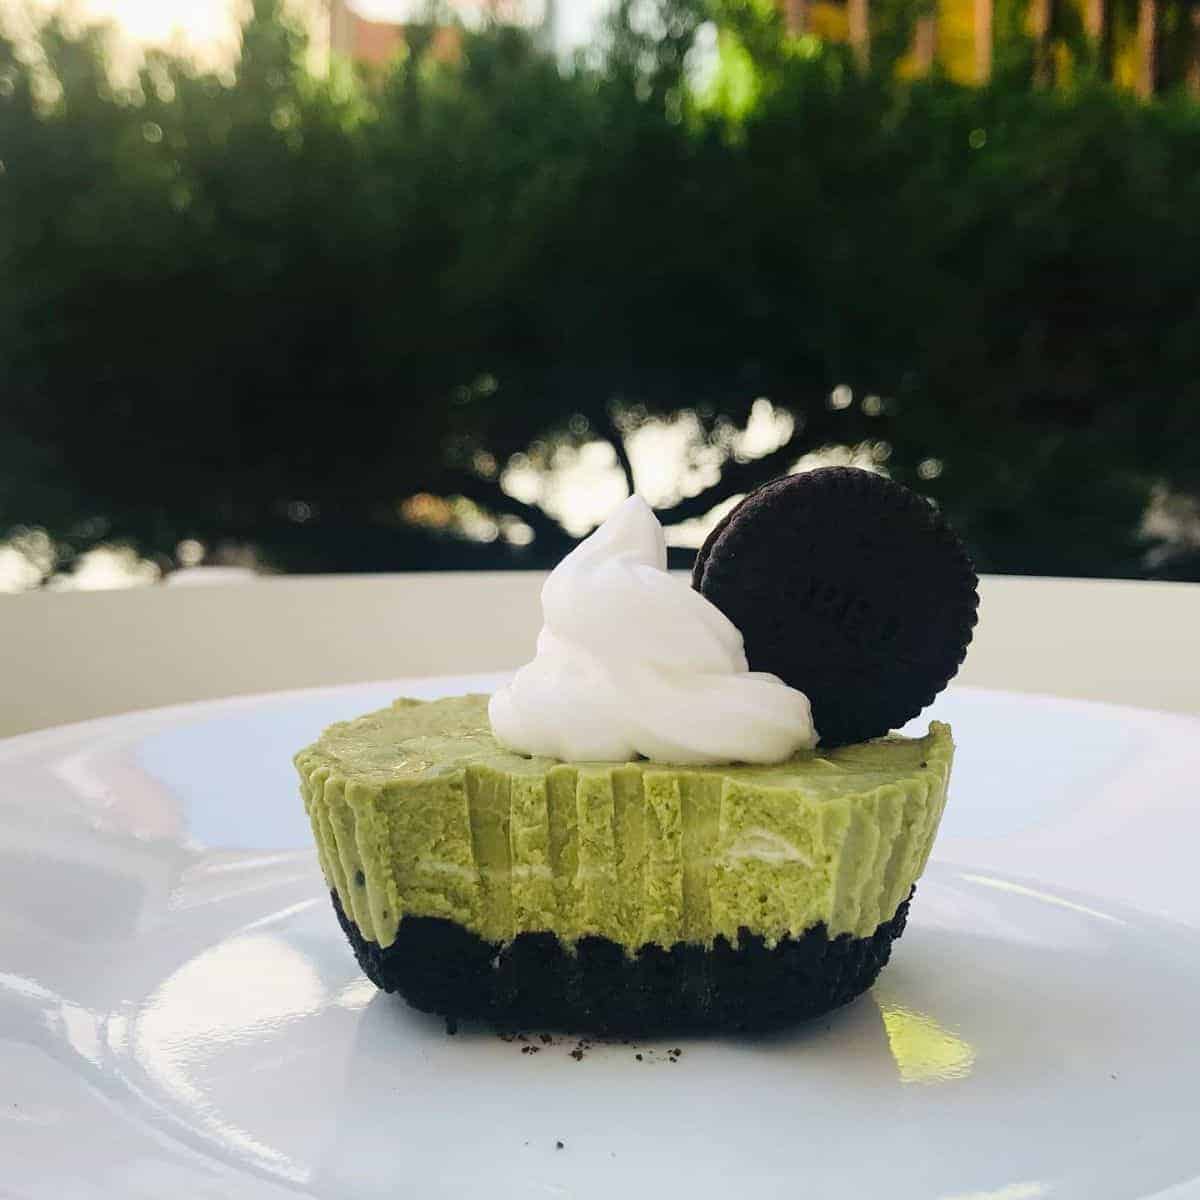 Matcha Oreo Cheesecake with a swirling white cream as decor